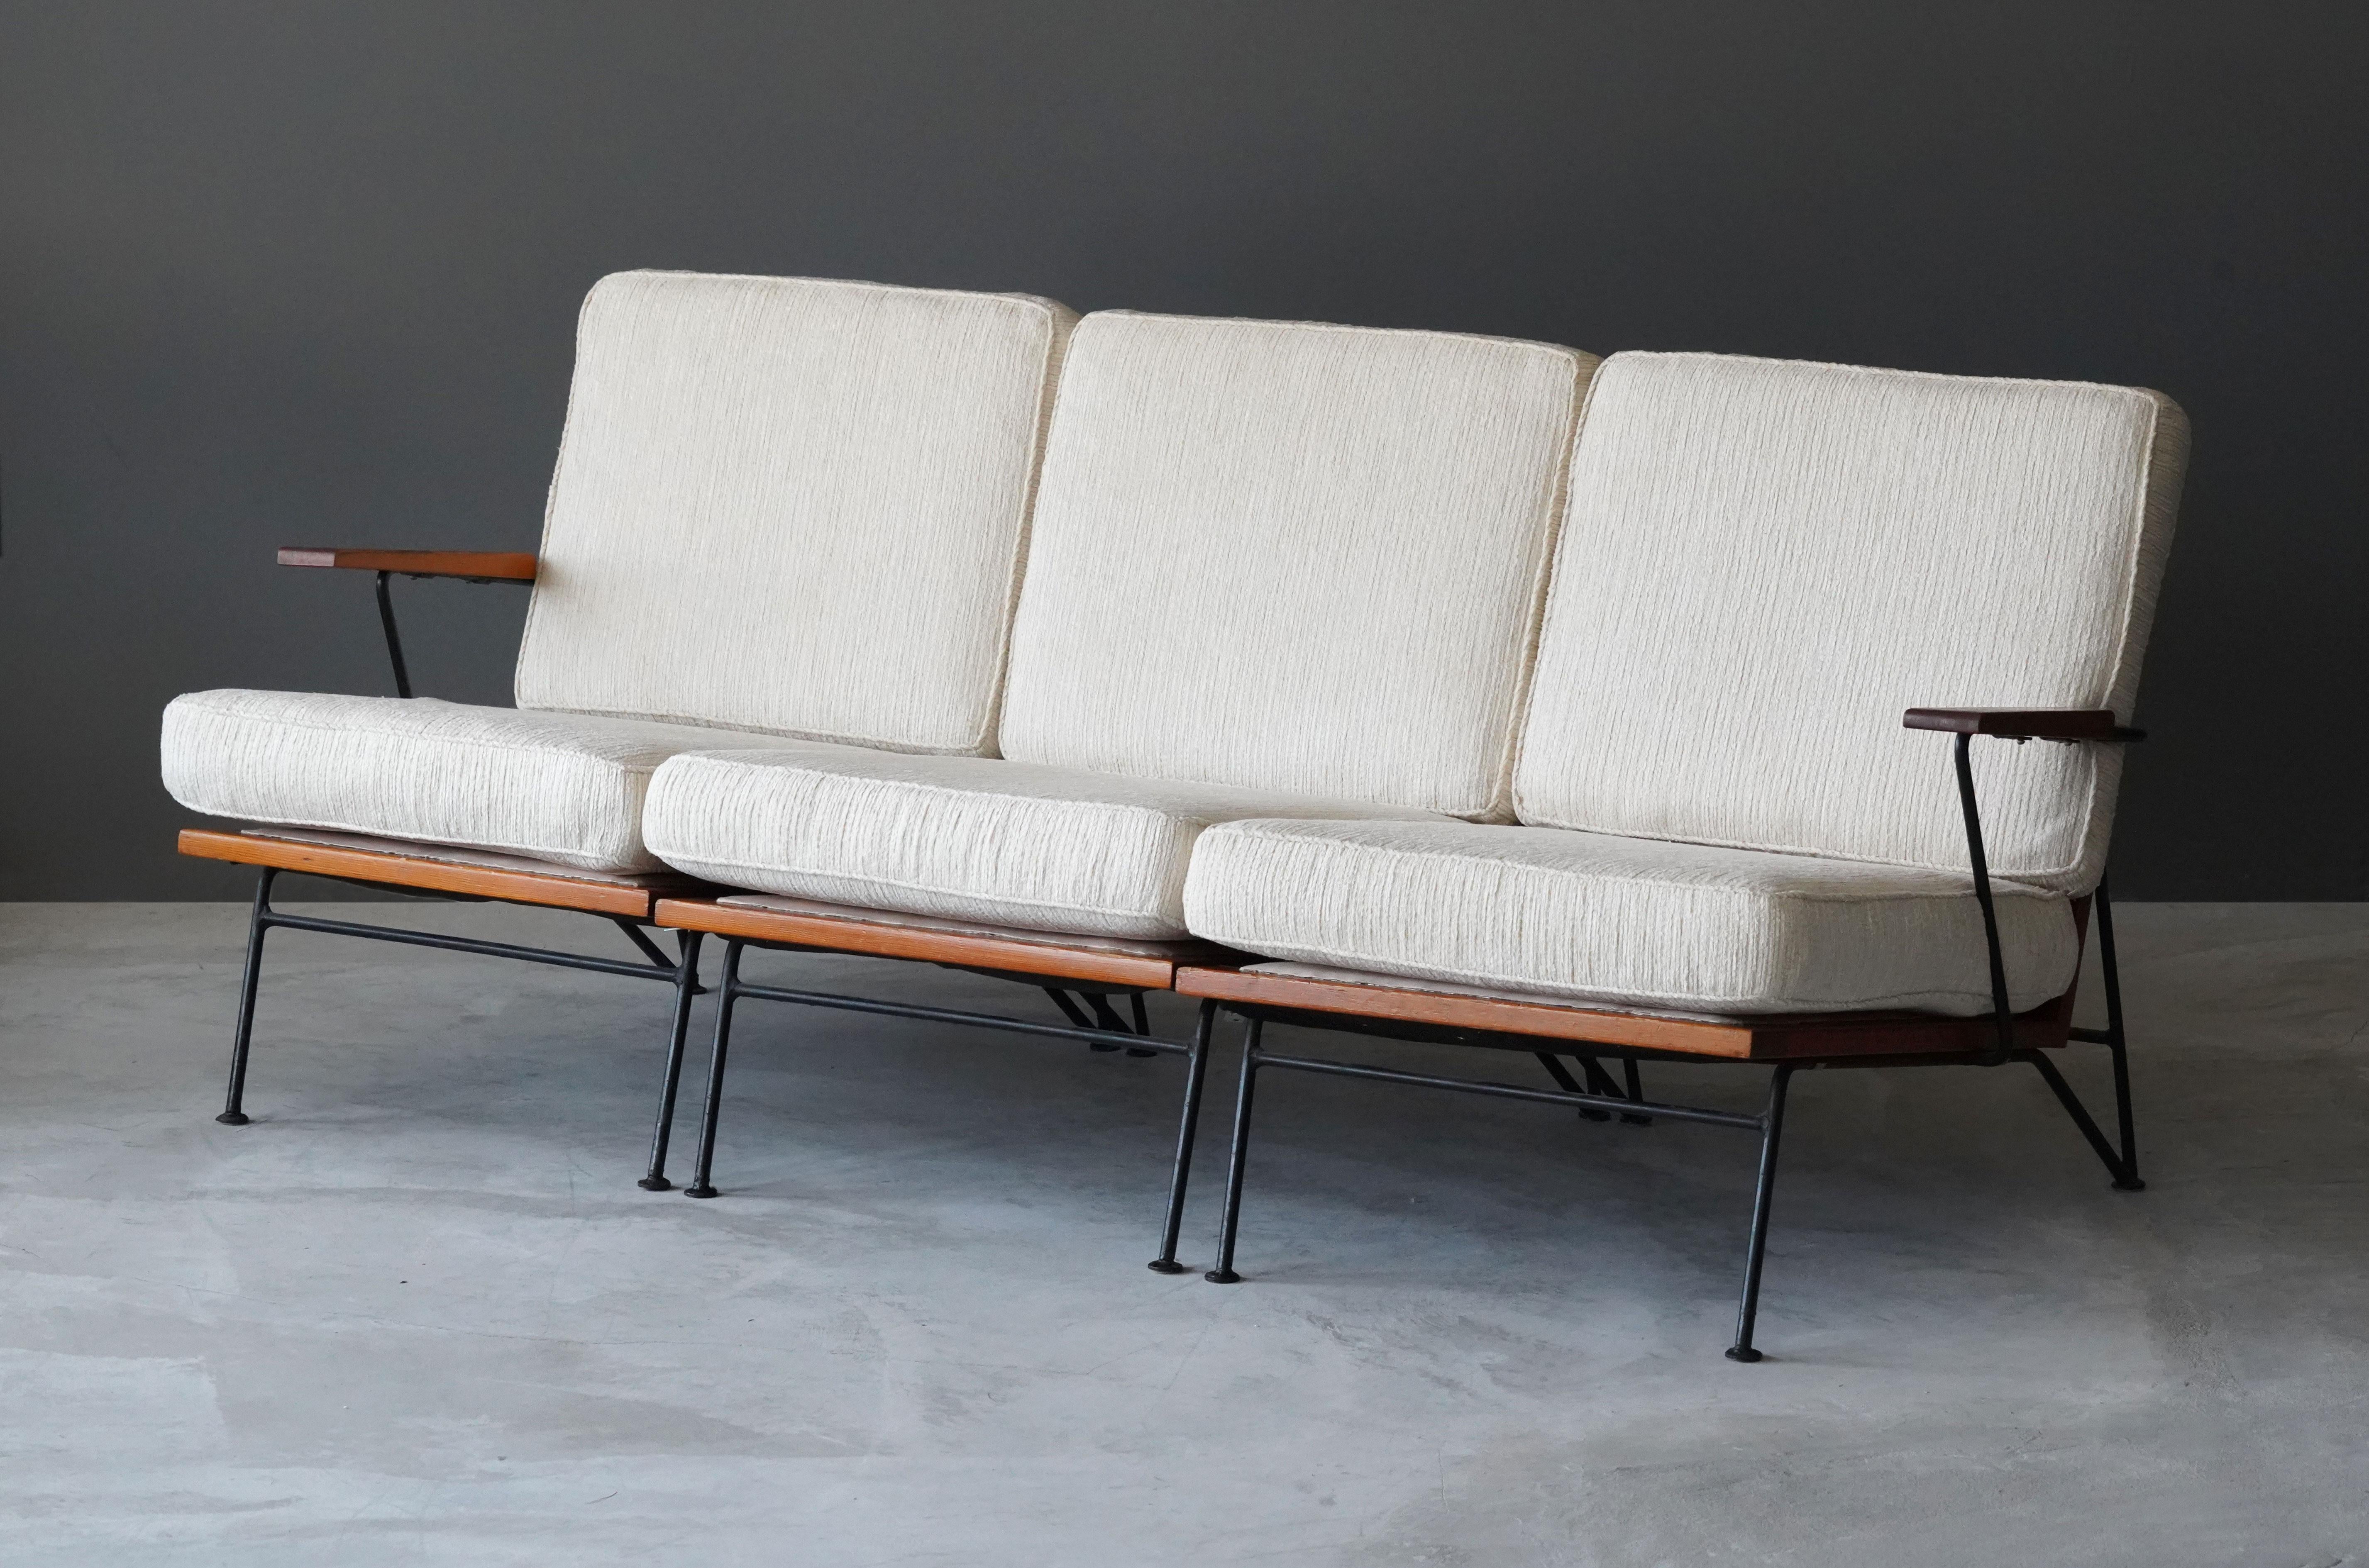 A sofa designed by husband and wife duo Pipsan Saarinen Swanson & J. Robert F. Swanson. Designed by their firm Swanson and Associates as part of the “Sol-Air” line for Ficks Reed Company, Cincinnati in 1949. 

The line was showcased at the 1950